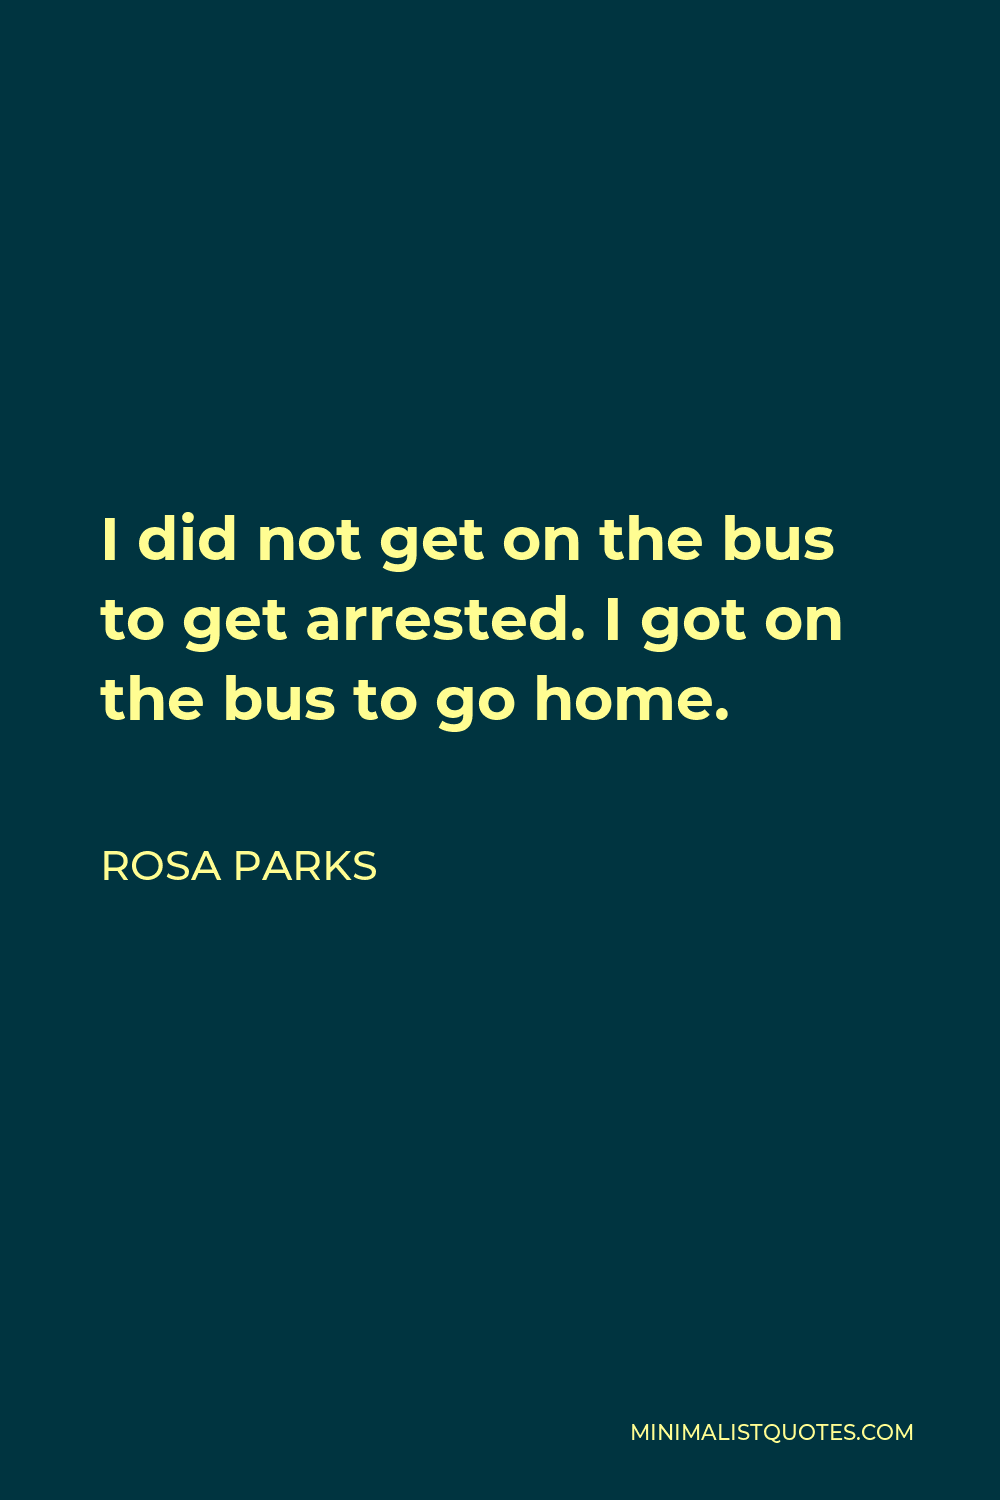 Rosa Parks Quote - I did not get on the bus to get arrested. I got on the bus to go home.